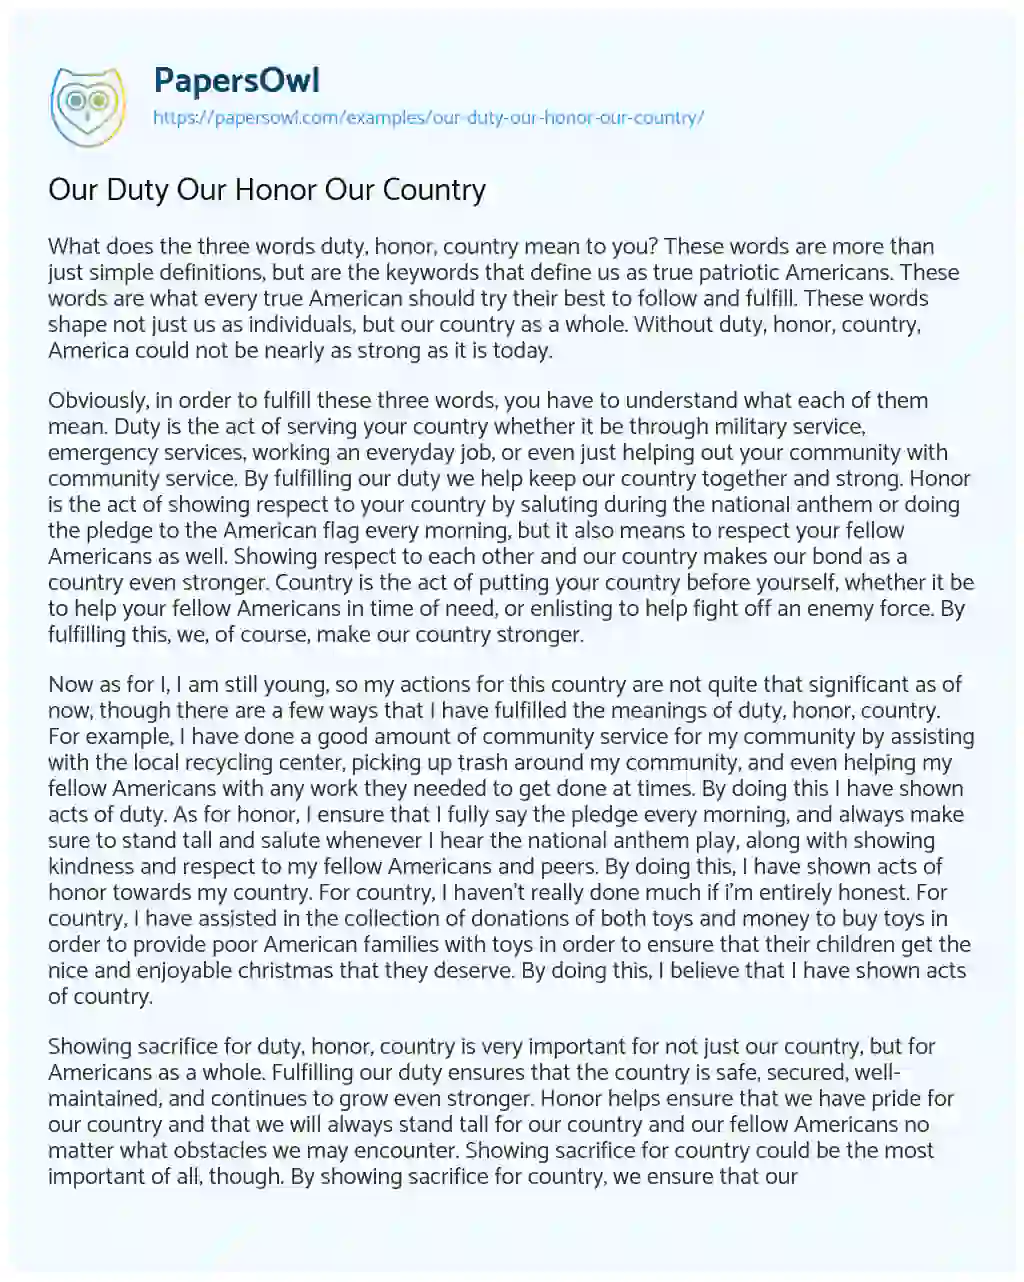 Essay on Our Duty our Honor our Country